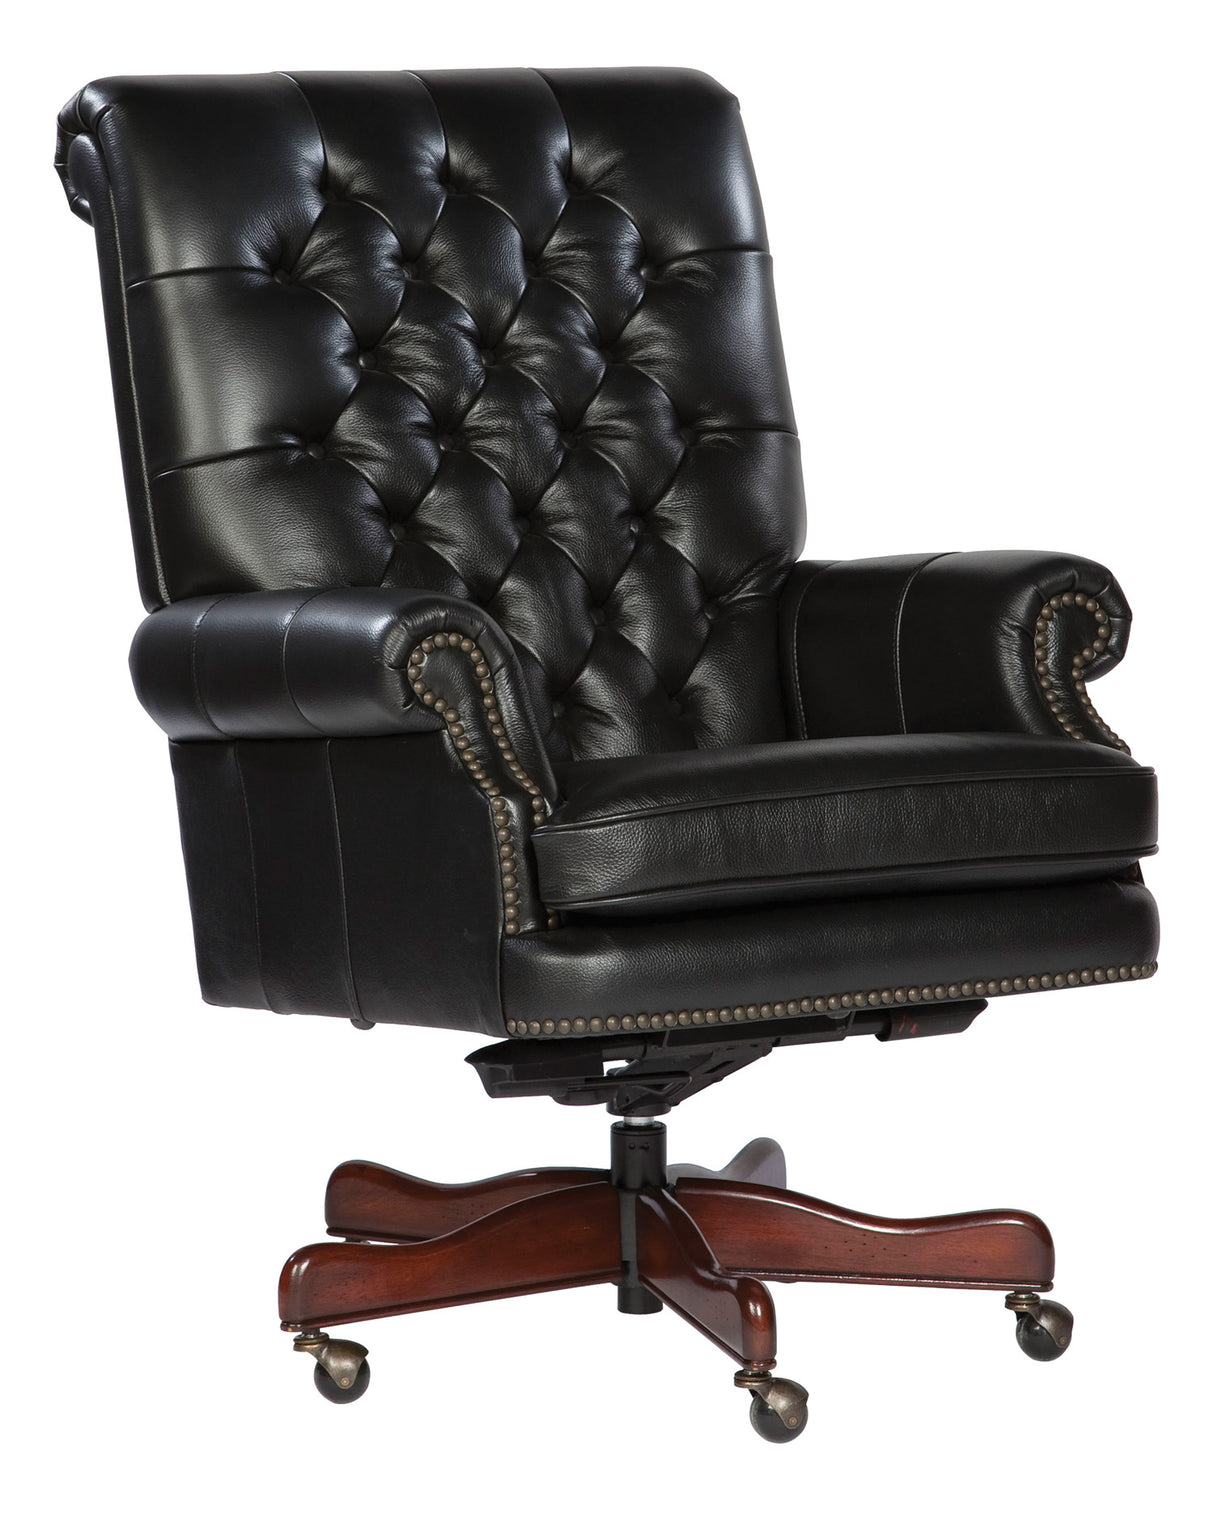 Hekman 79253B Office 29in. x 36.5in. x 46in. Executive Office Chair